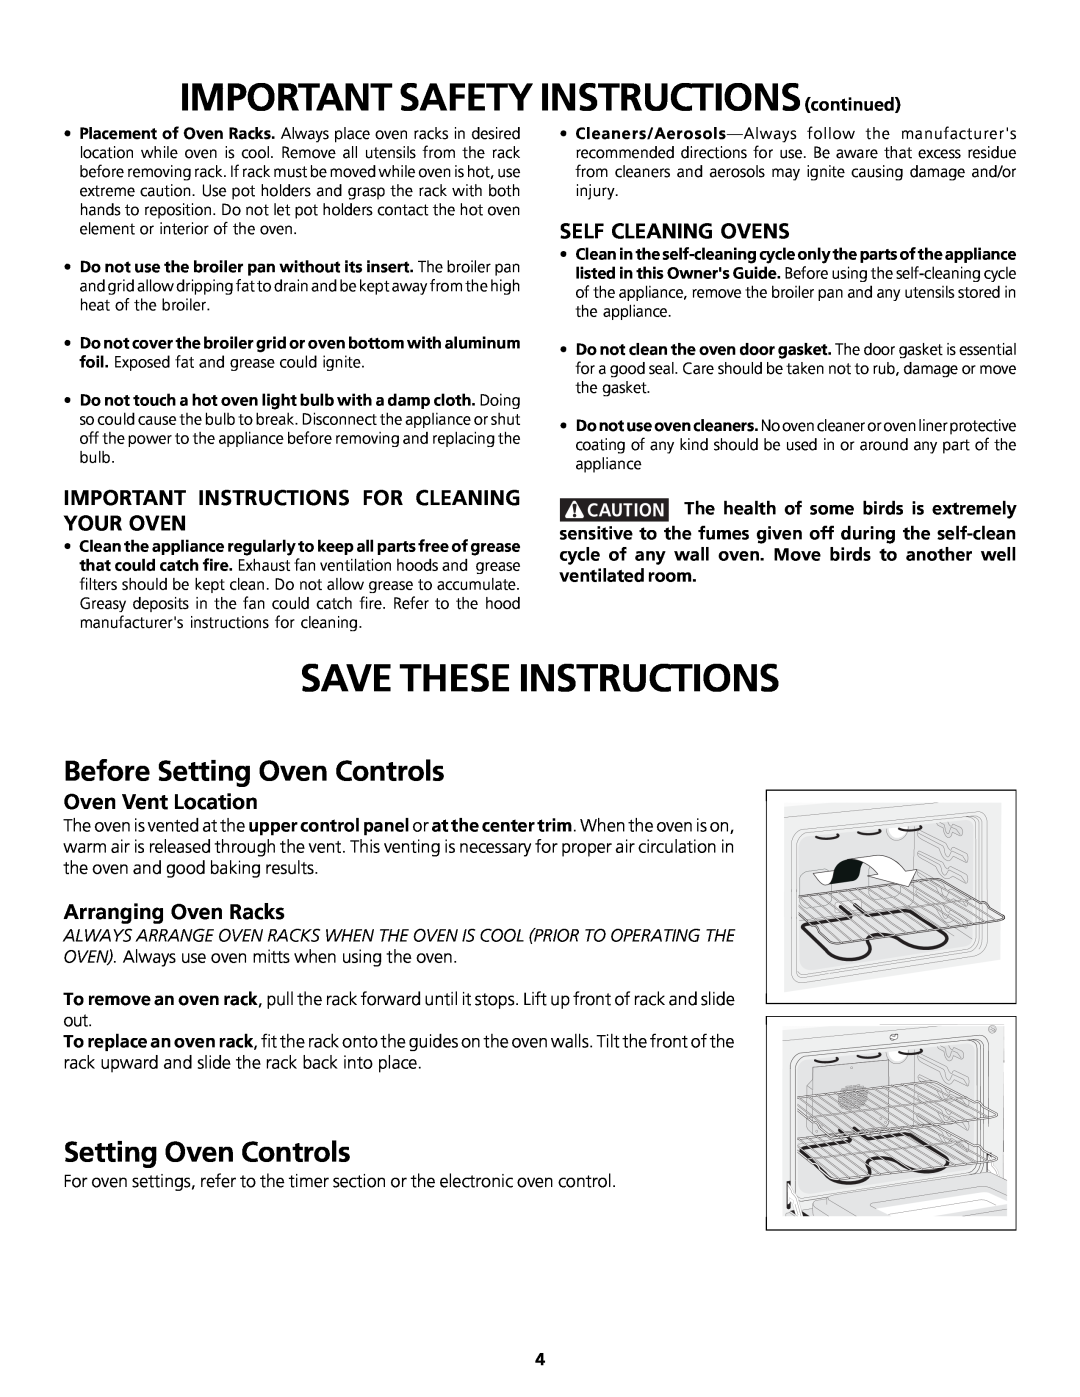 Frigidaire 318200920 IMPORTANT SAFETY INSTRUCTIONScontinued, Save These Instructions, Before Setting Oven Controls 